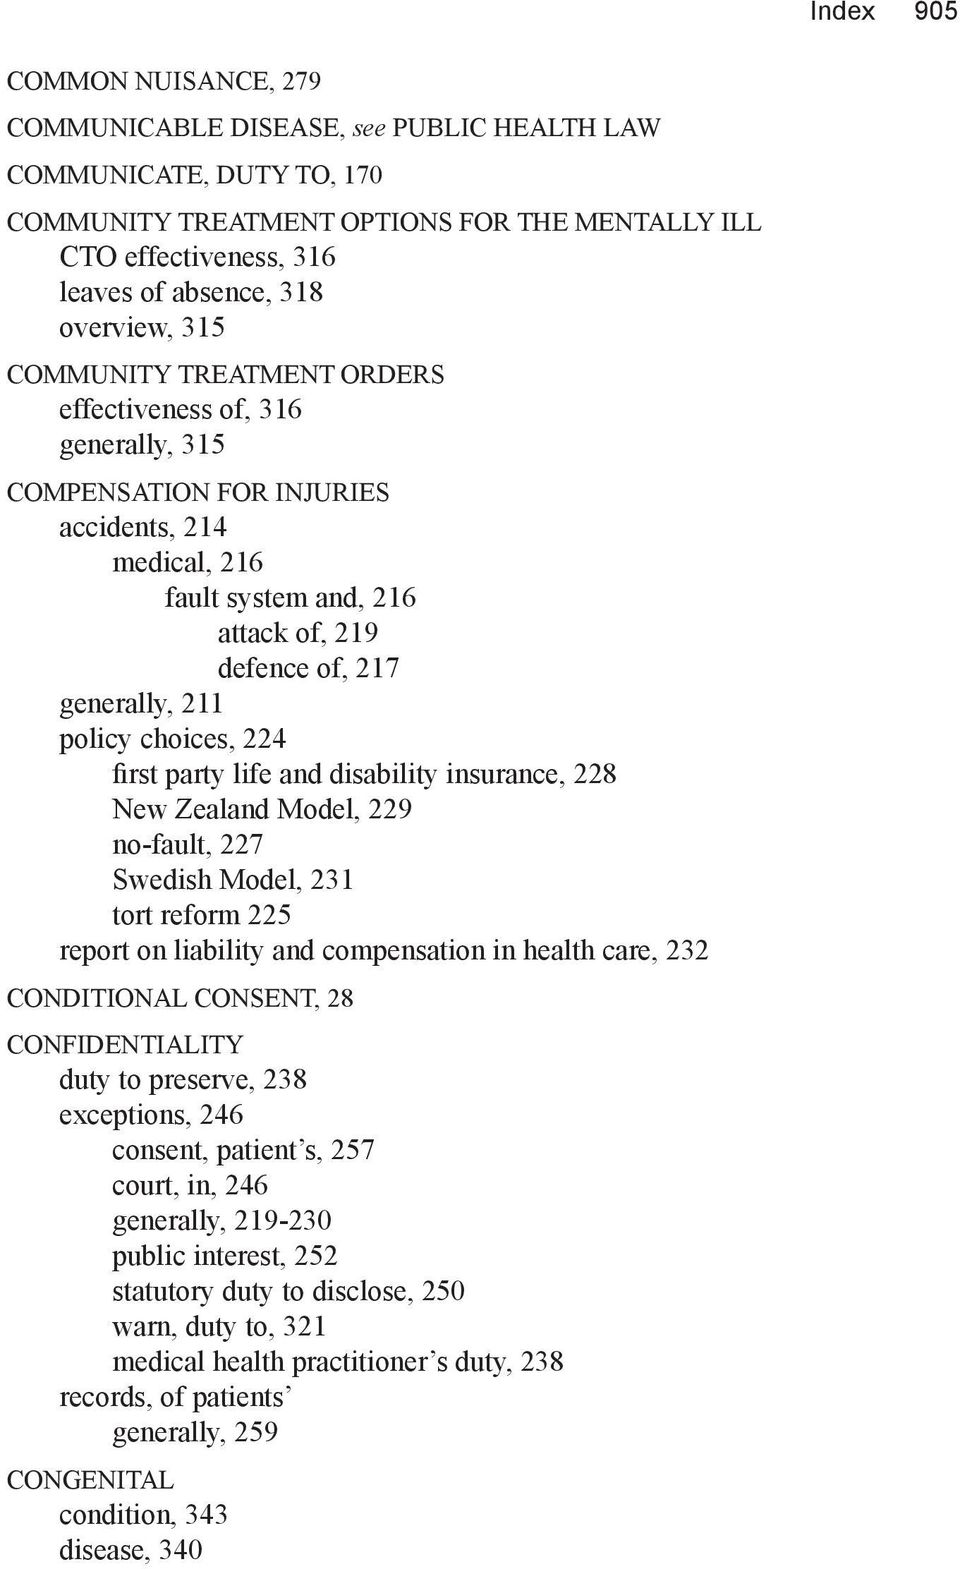 policy choices, 224 first party life and disability insurance, 228 New Zealand Model, 229 no-fault, 227 Swedish Model, 231 tort reform 225 report on liability and compensation in health care, 232